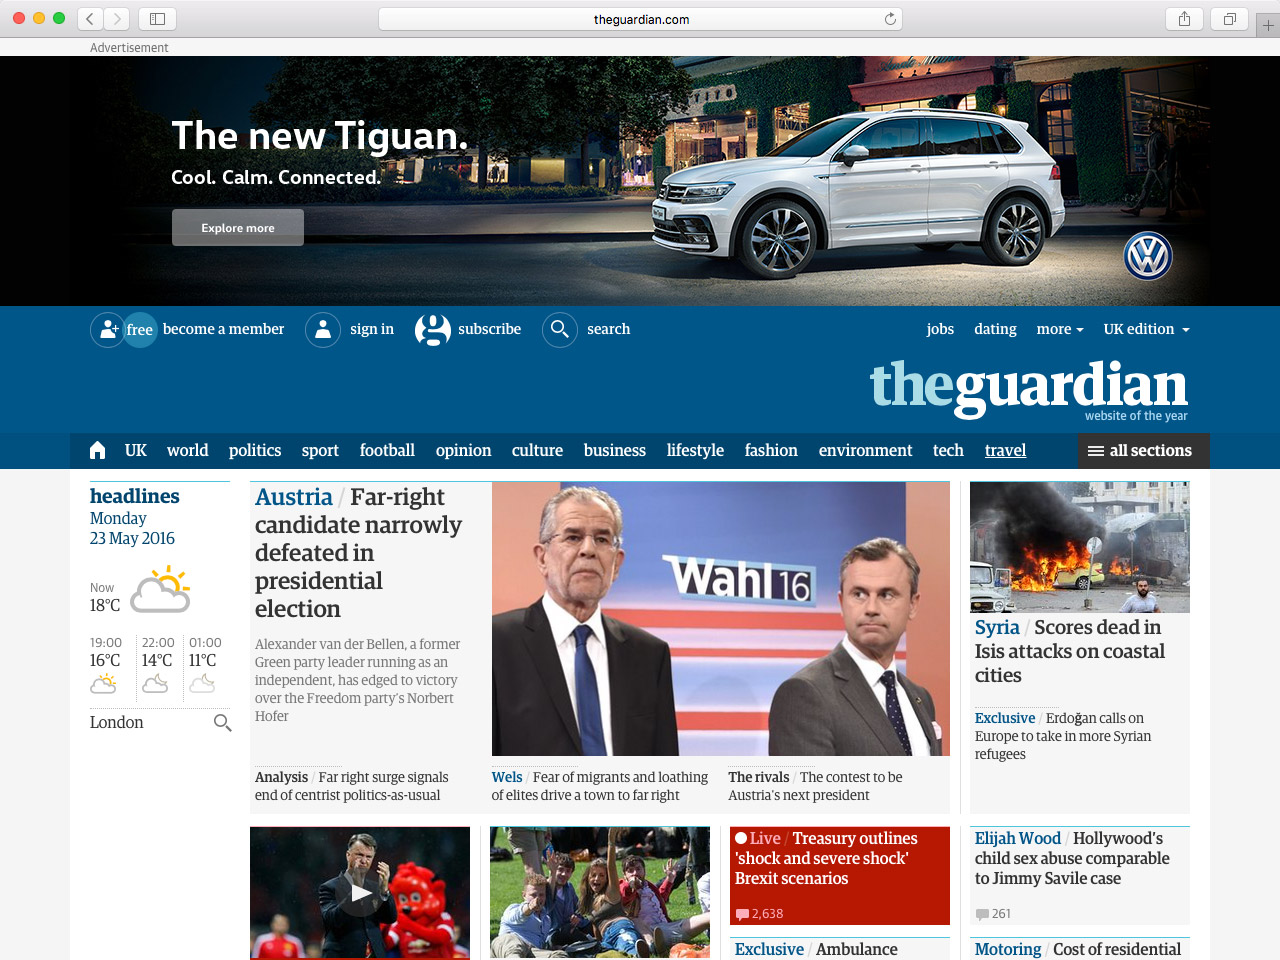 A real-world example of a Priorty+ navigation on the Guardian website